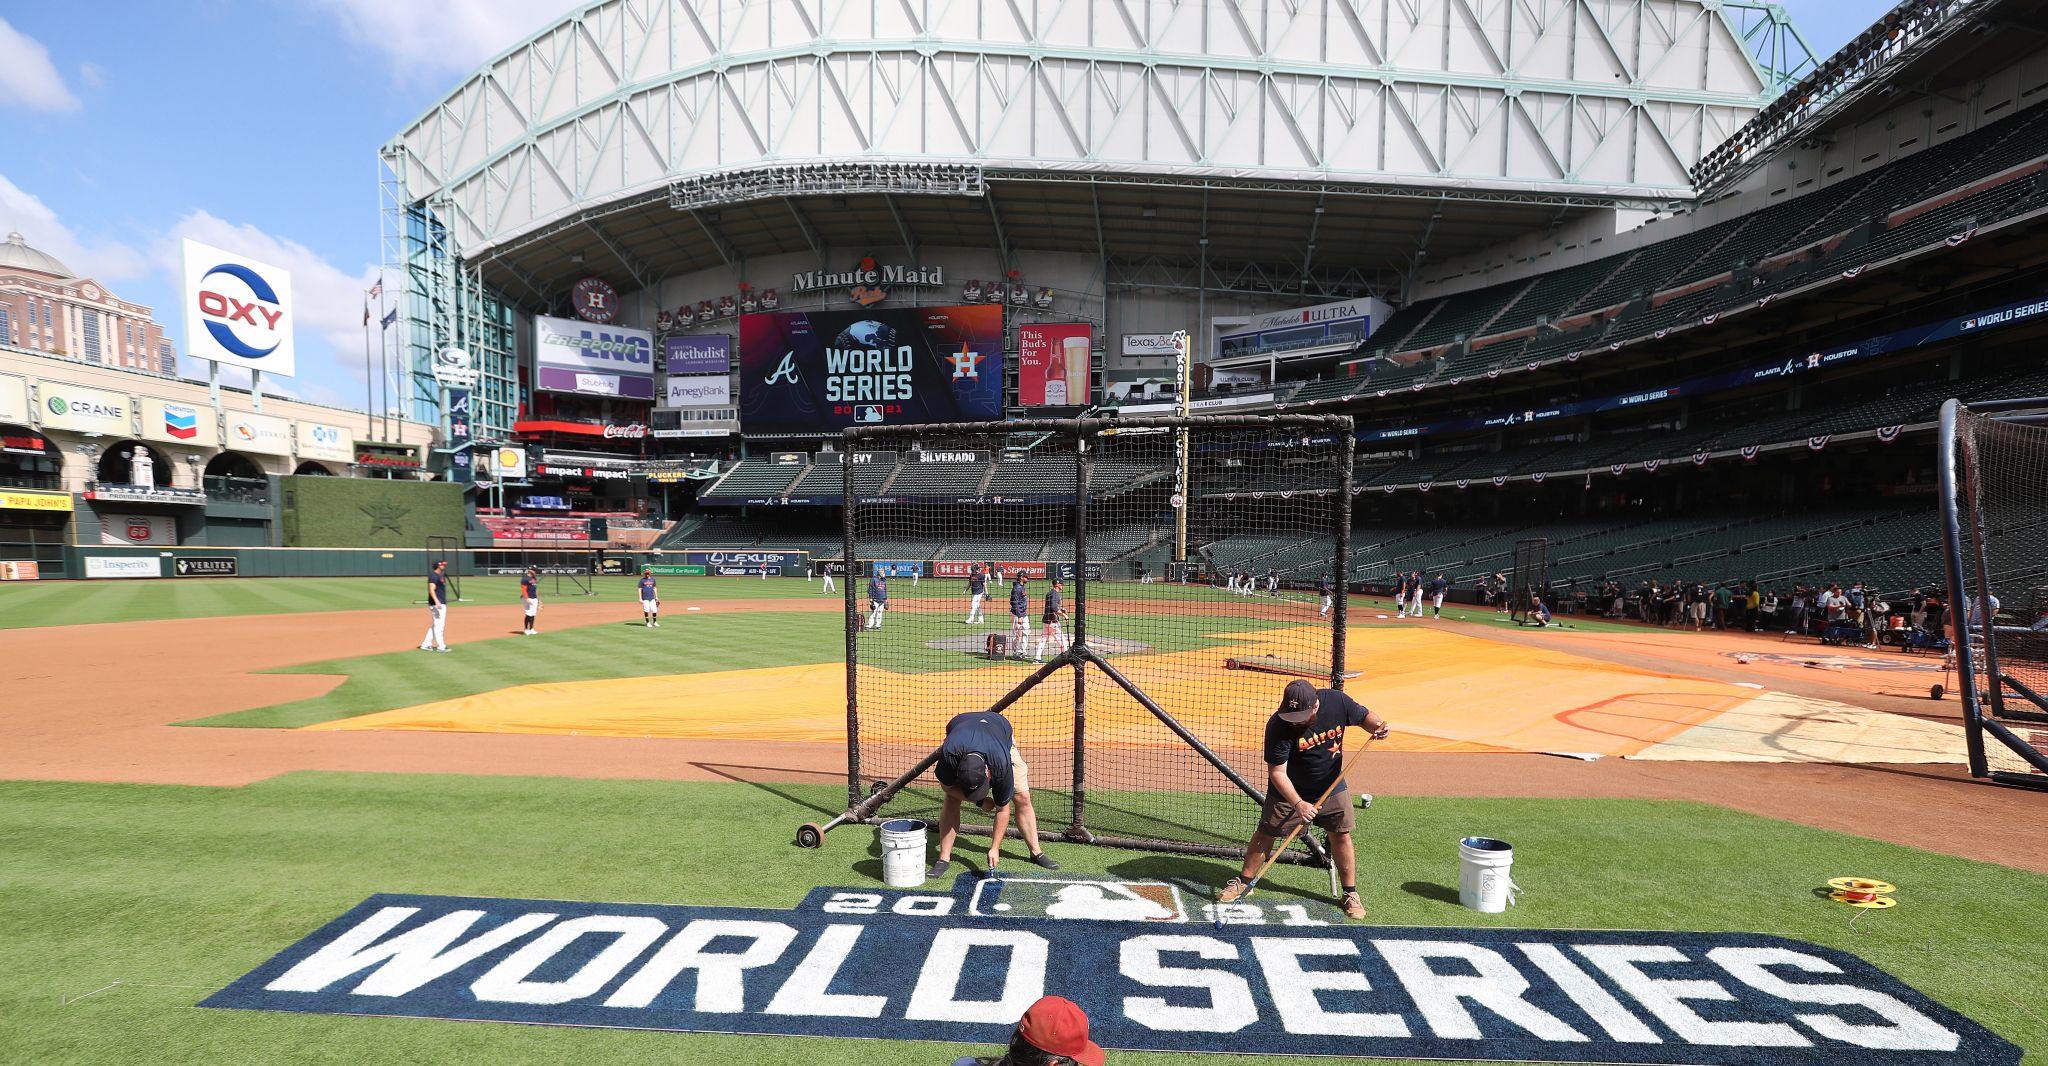 Minute Maid Park roof will open for World Series Game 2 